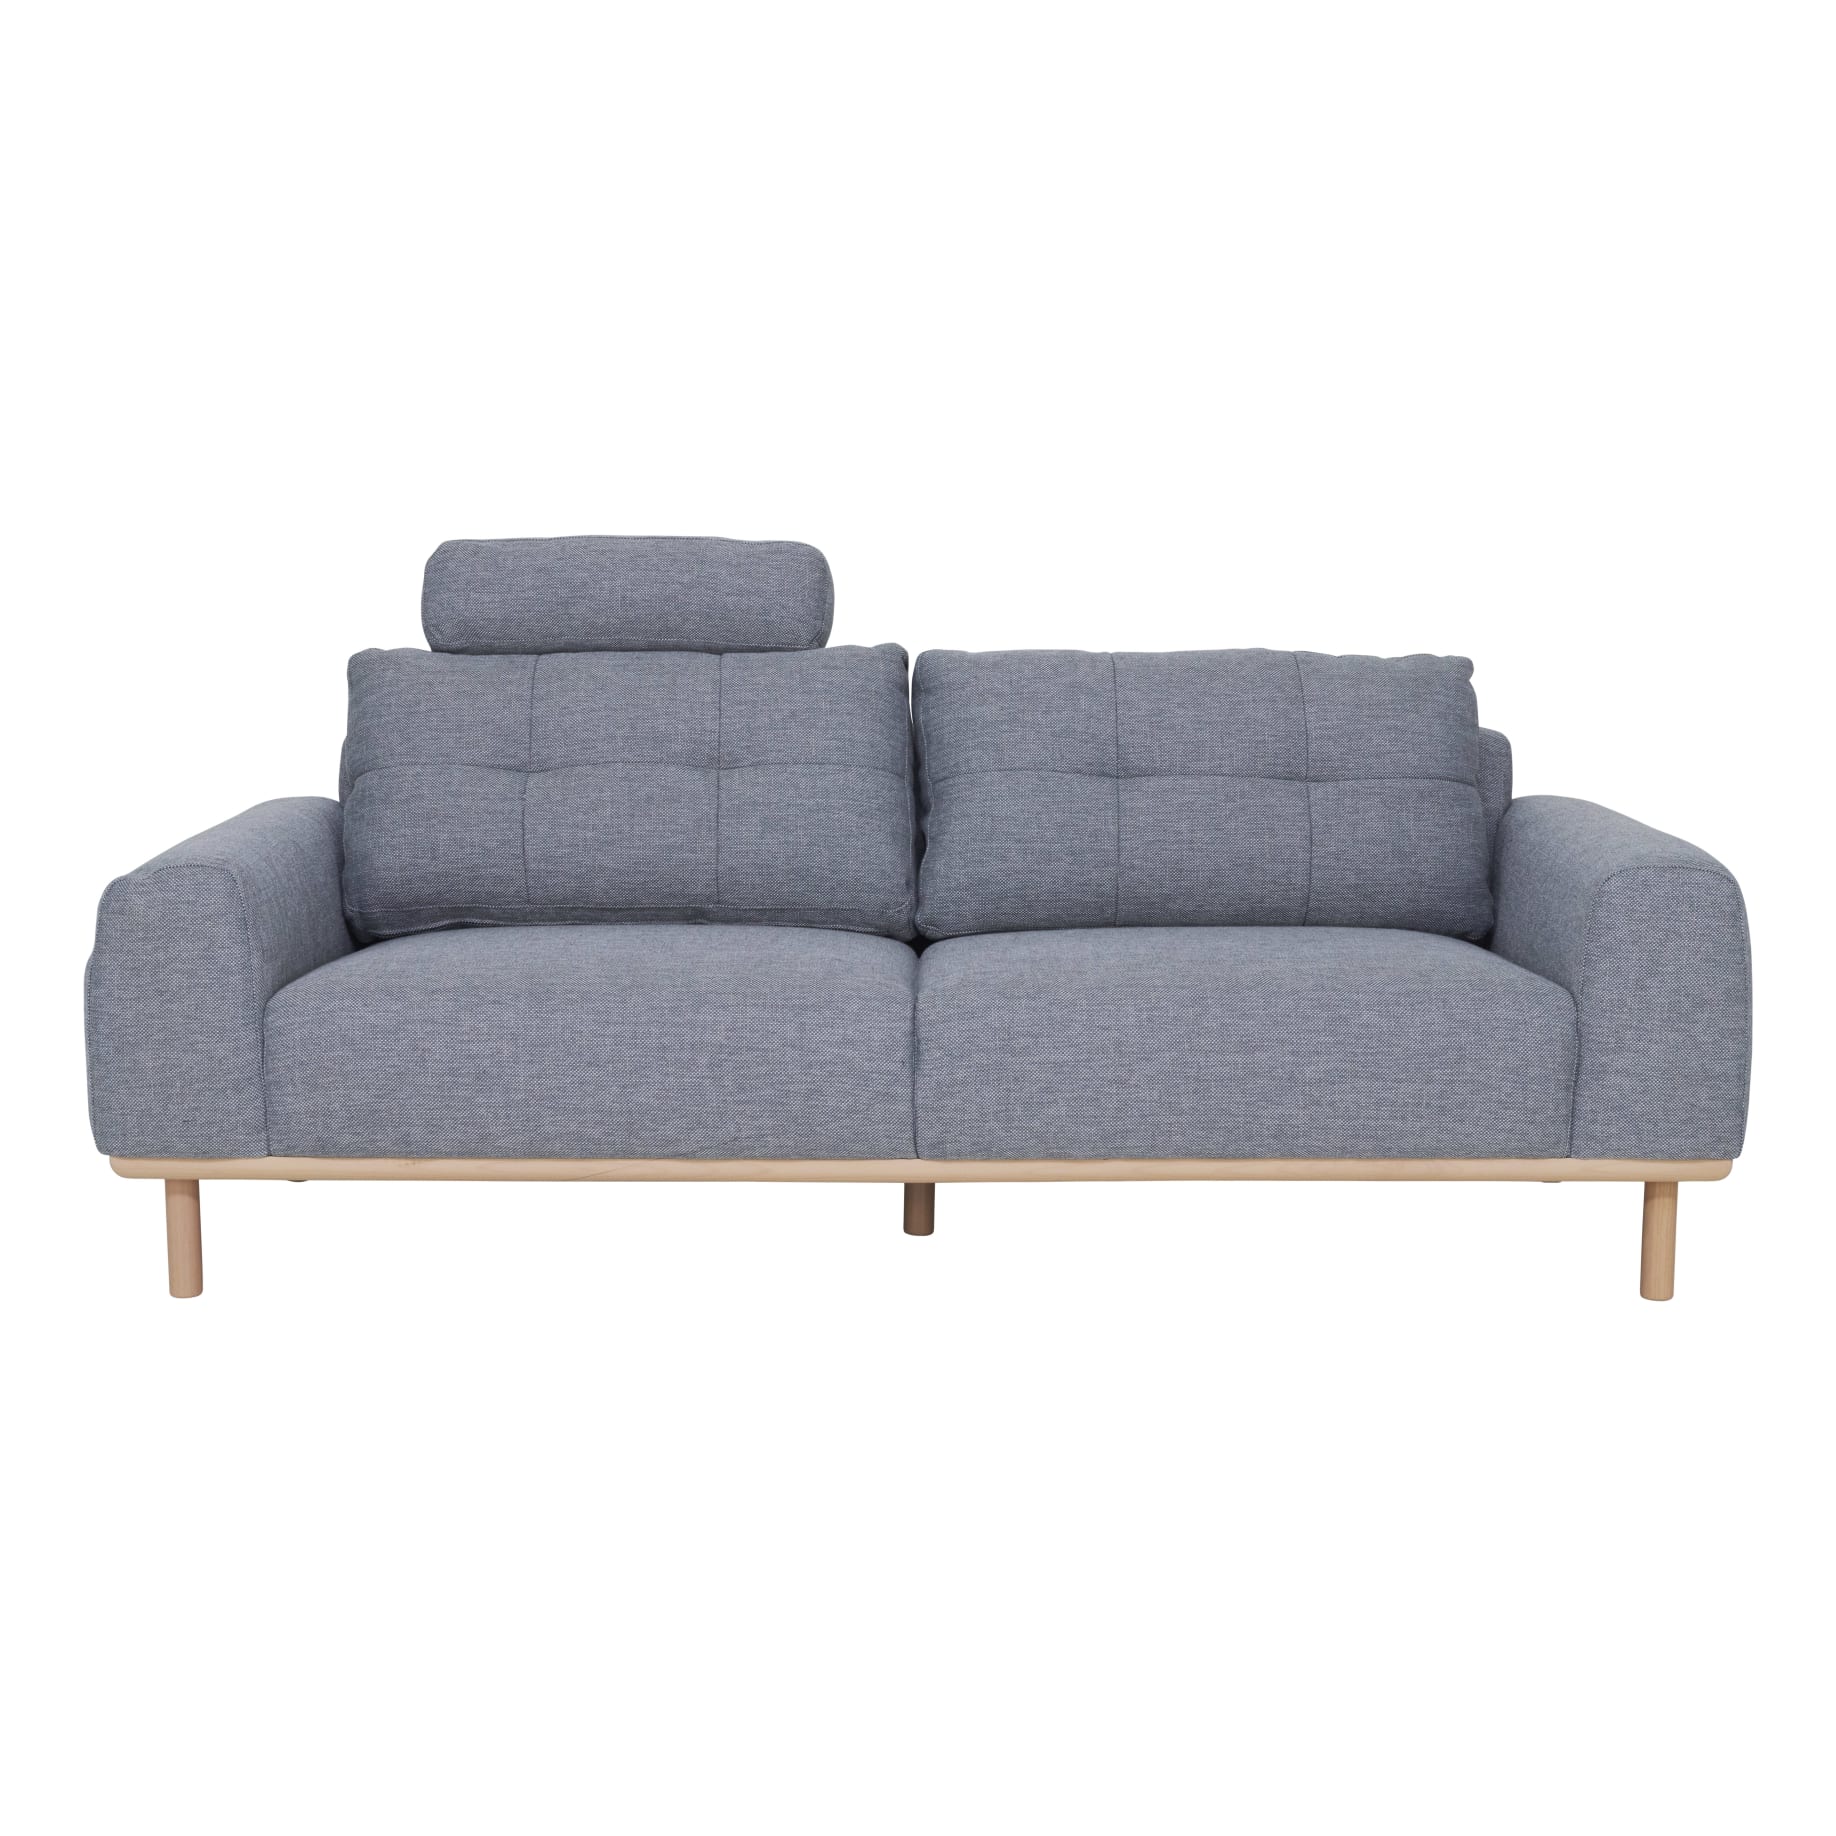 Stratton 3 Seater in Cloud Pewter